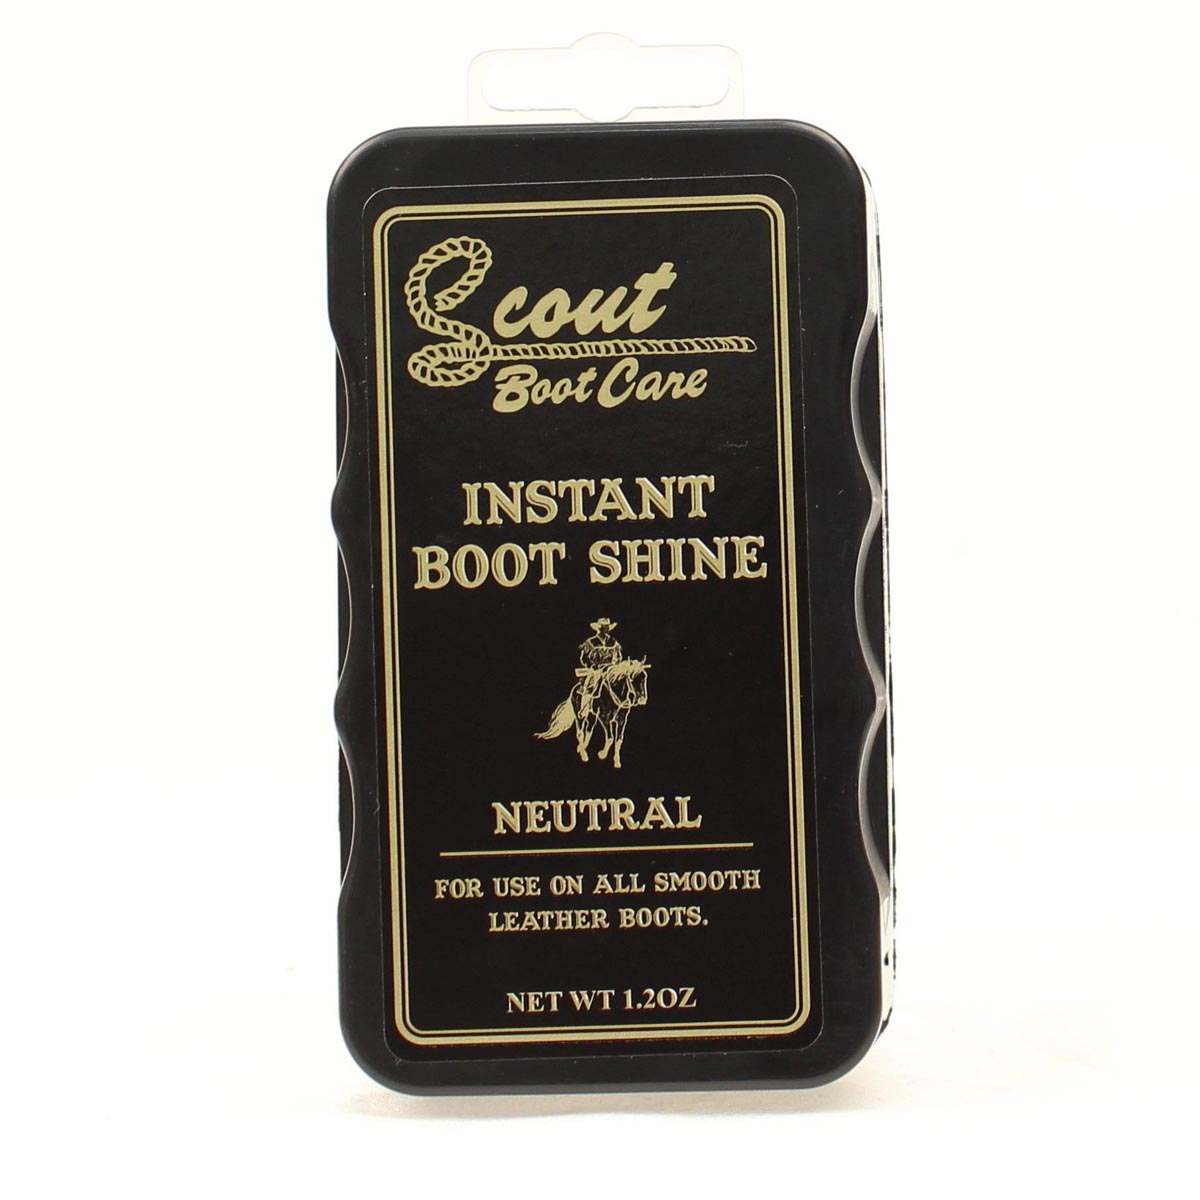 Scout Instant Boot Shine - yeehawcowboy